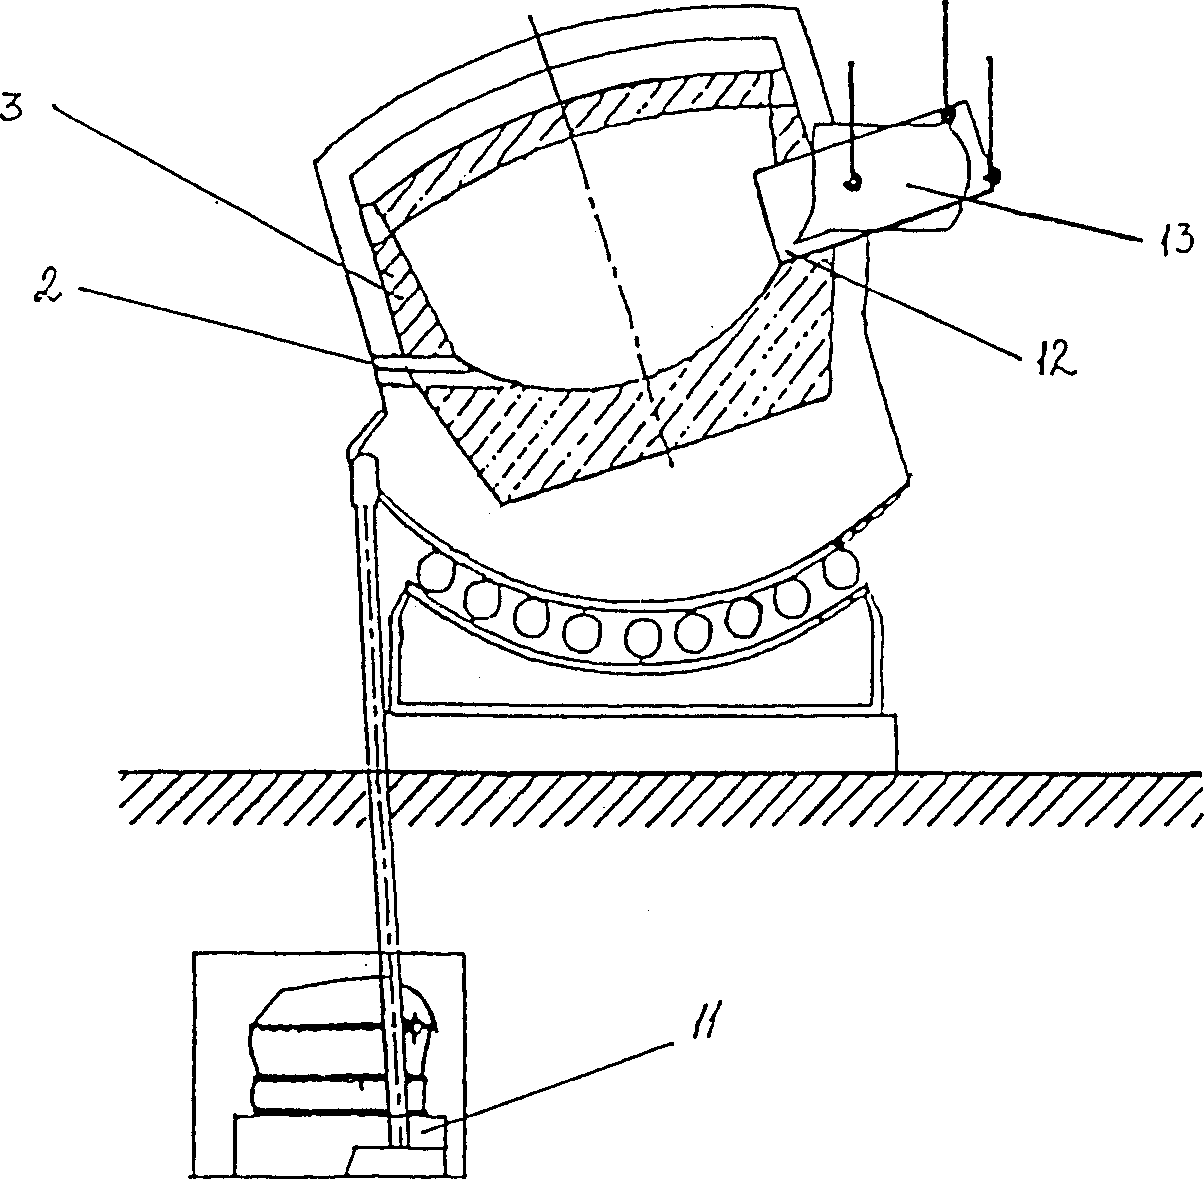 Multichambered stellmaking apparatus and method of steelmaking using this apparatus